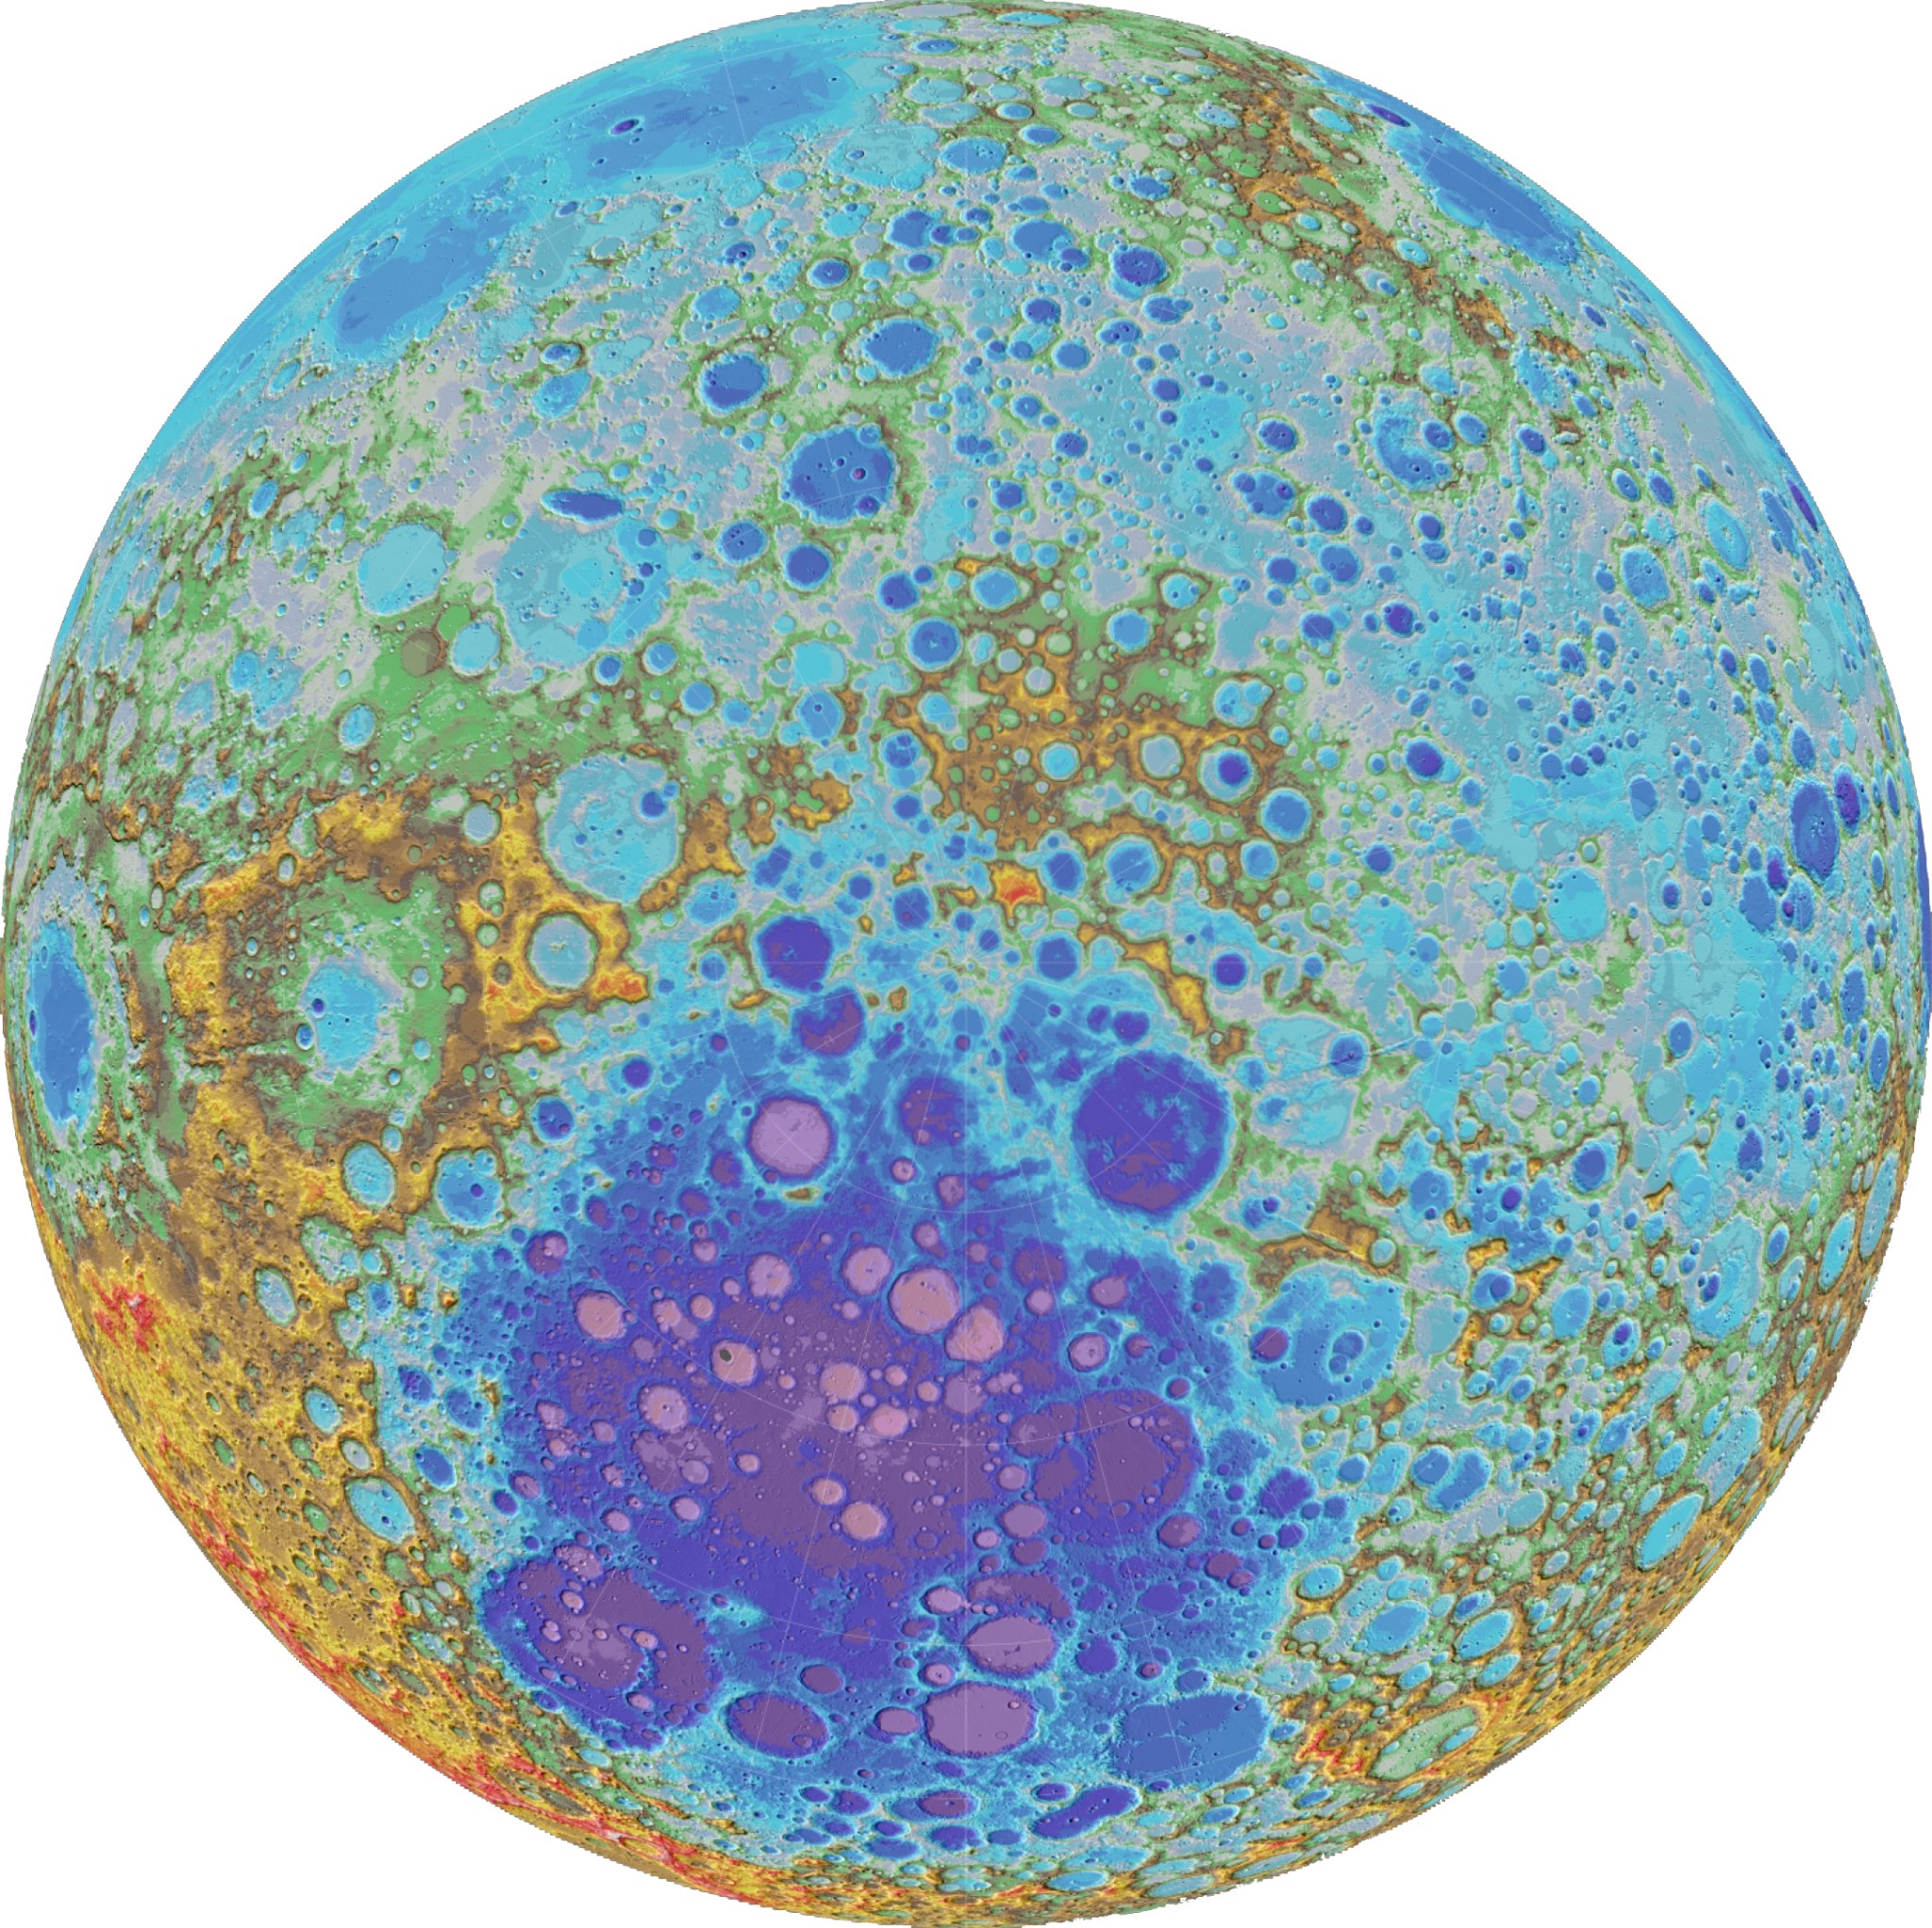 Among NASA’s Lunar Reconnaissance Orbiter images now at the Huntsville Museum of Art is this view of the Moon’s south pole.